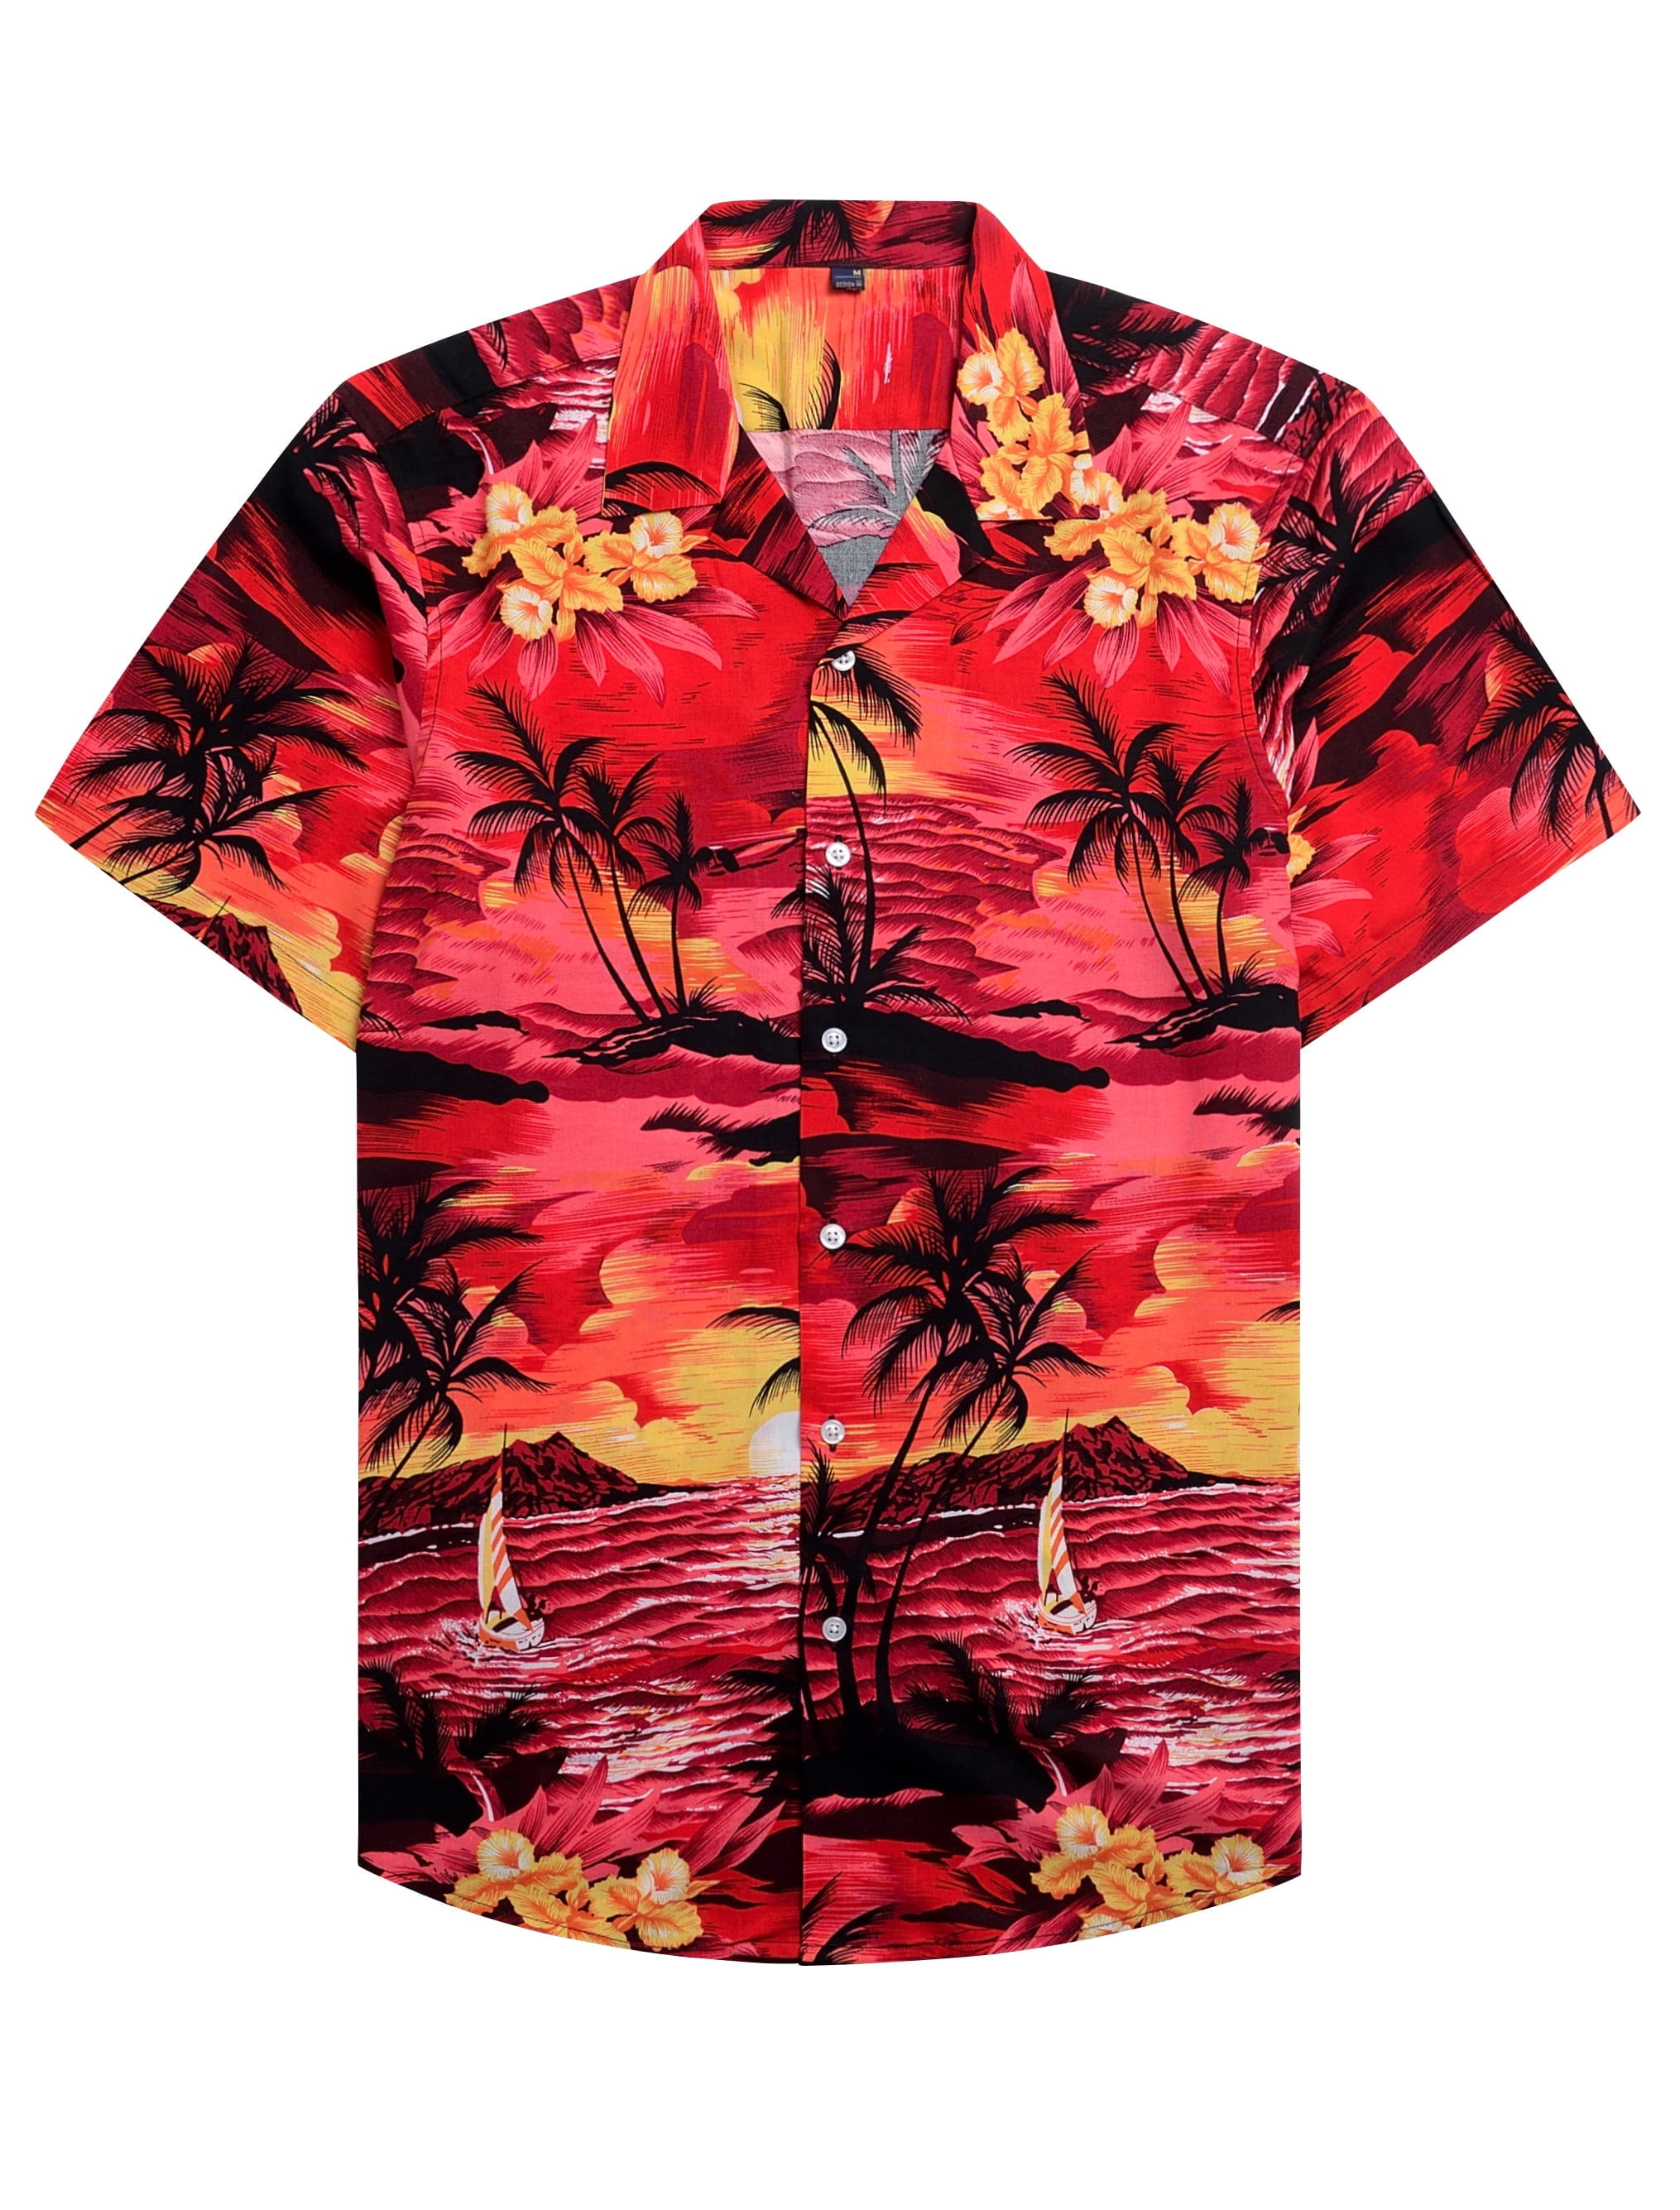 XMMSWDLA Shirts for Men Regular Fit Short Sleeve Mens Hawaiian Shirts with  Large Variety Of Colors and Designs Available Green Shirts for Men 